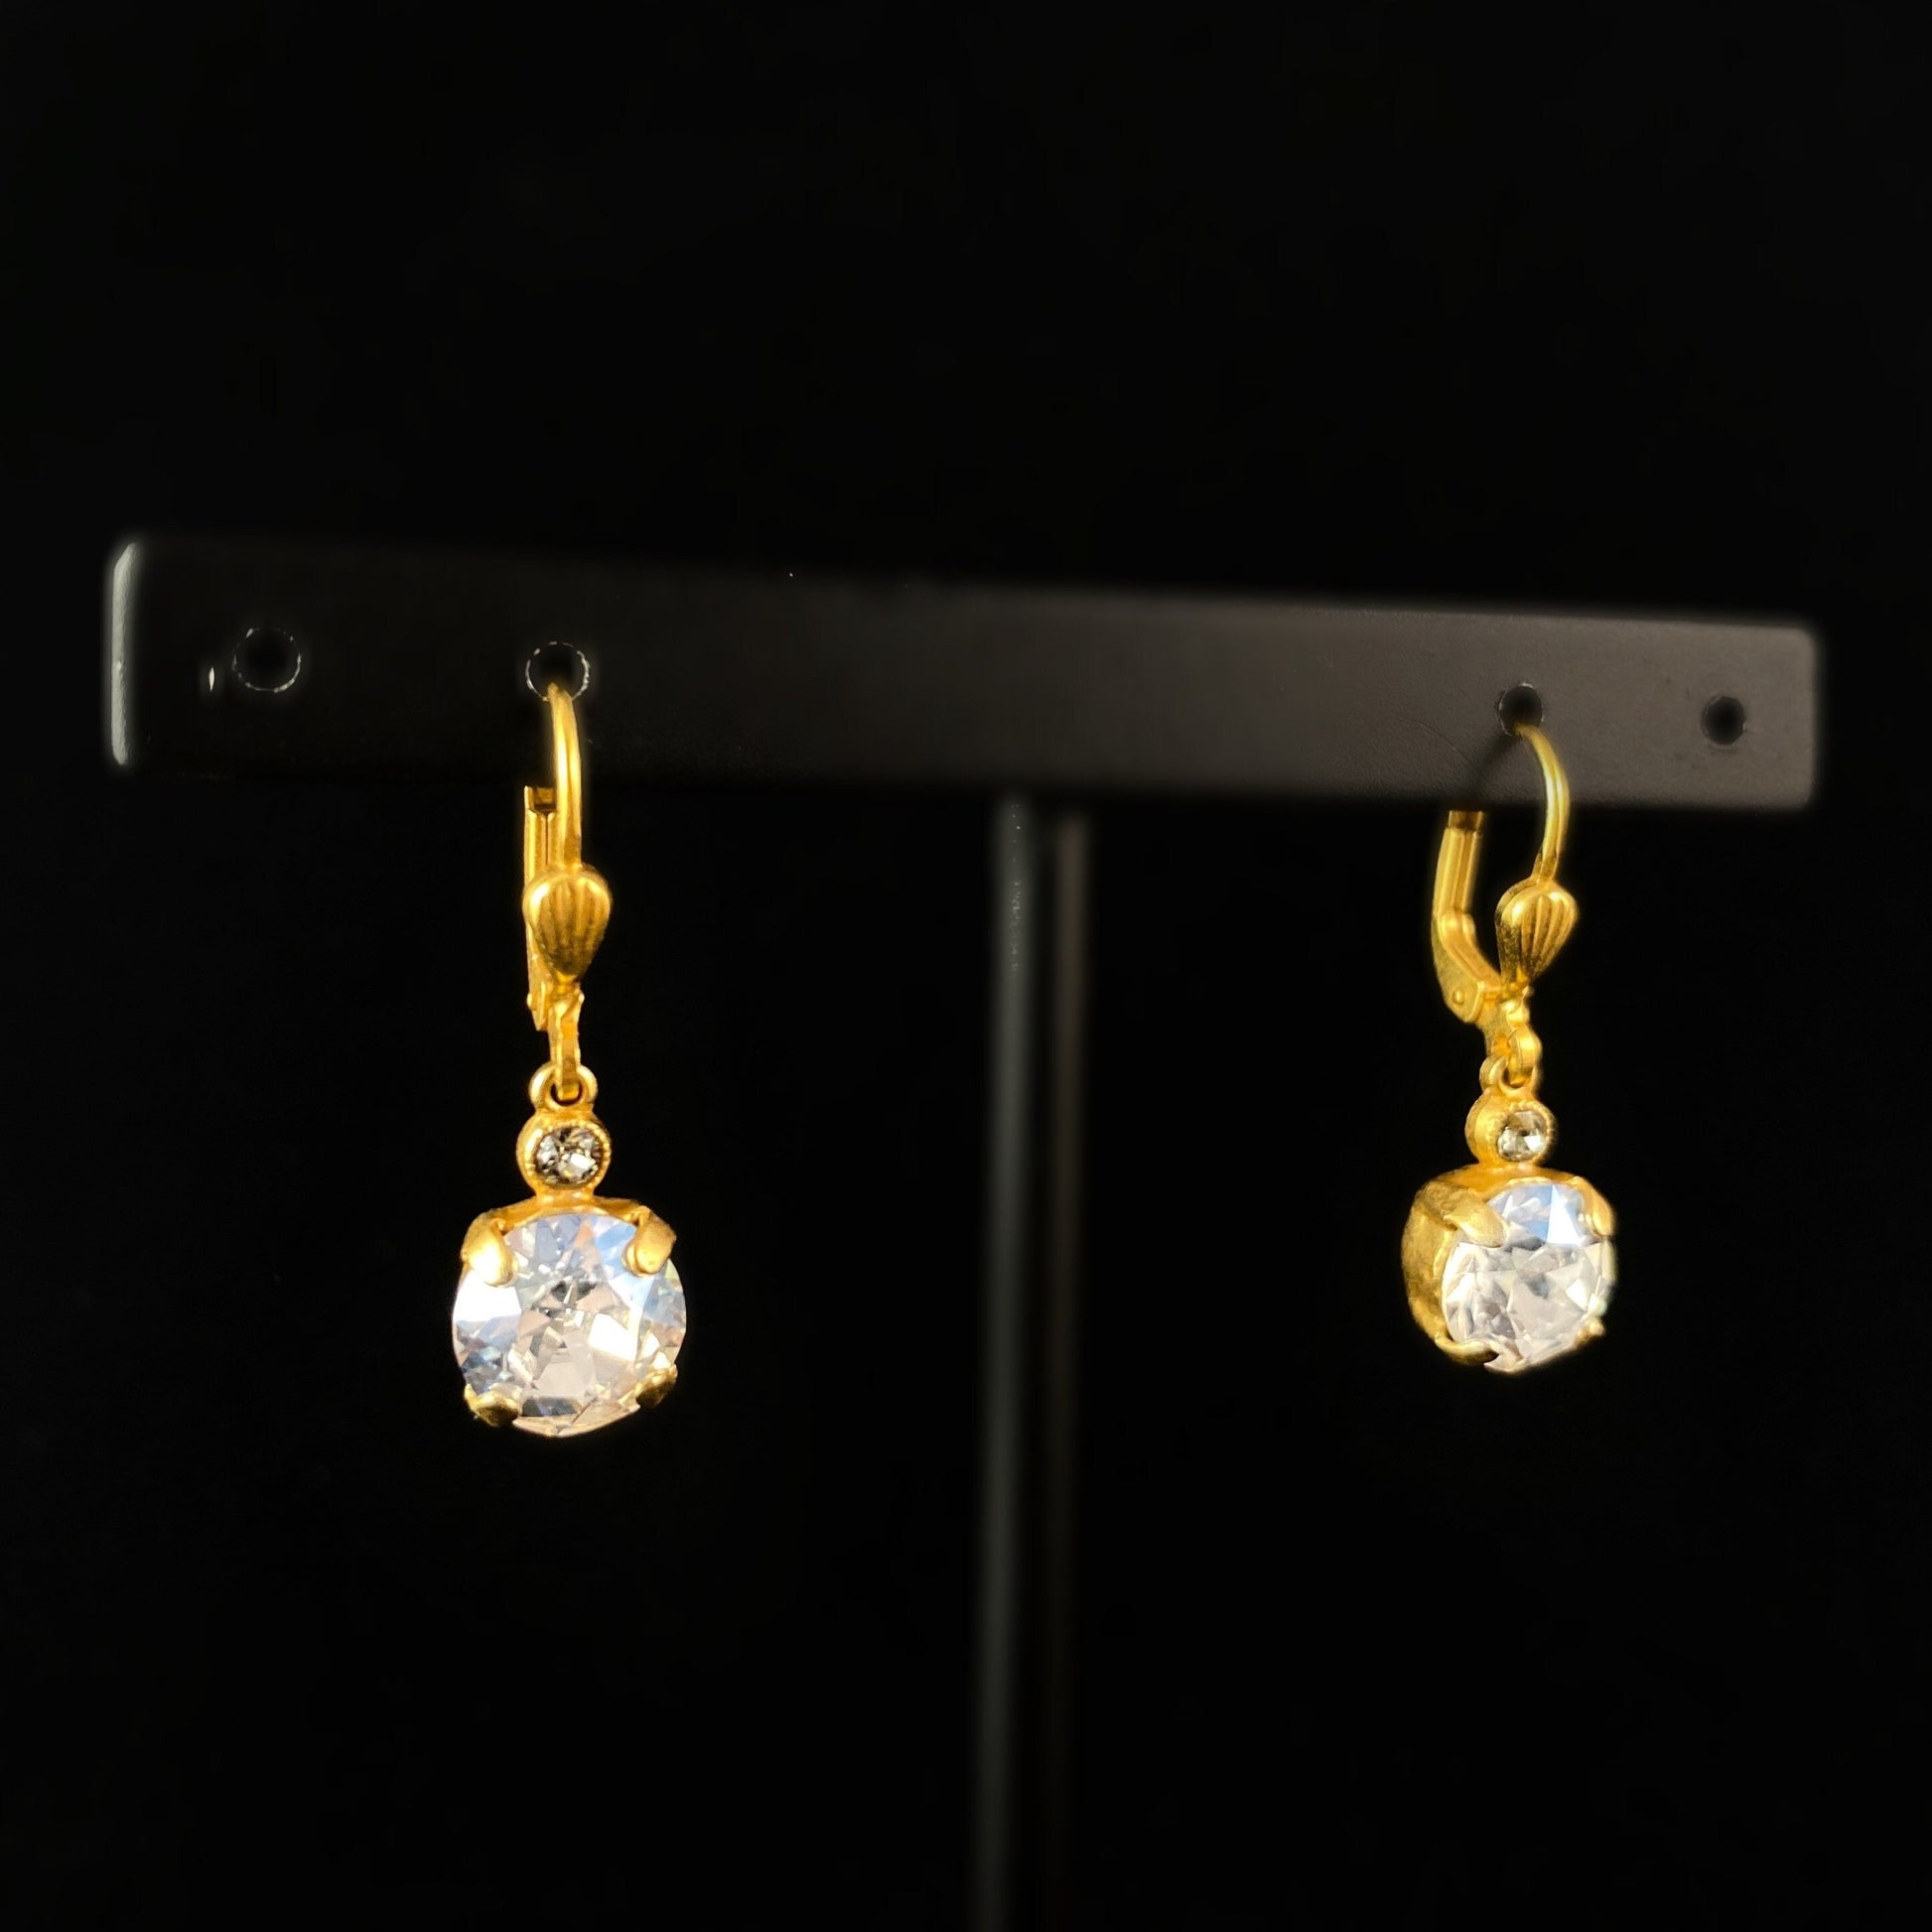 Round Clear Swarovski Crystal Drop Earrings with Tiny Crystal Detailing- La Vie Parisienne by Catherine Popesco